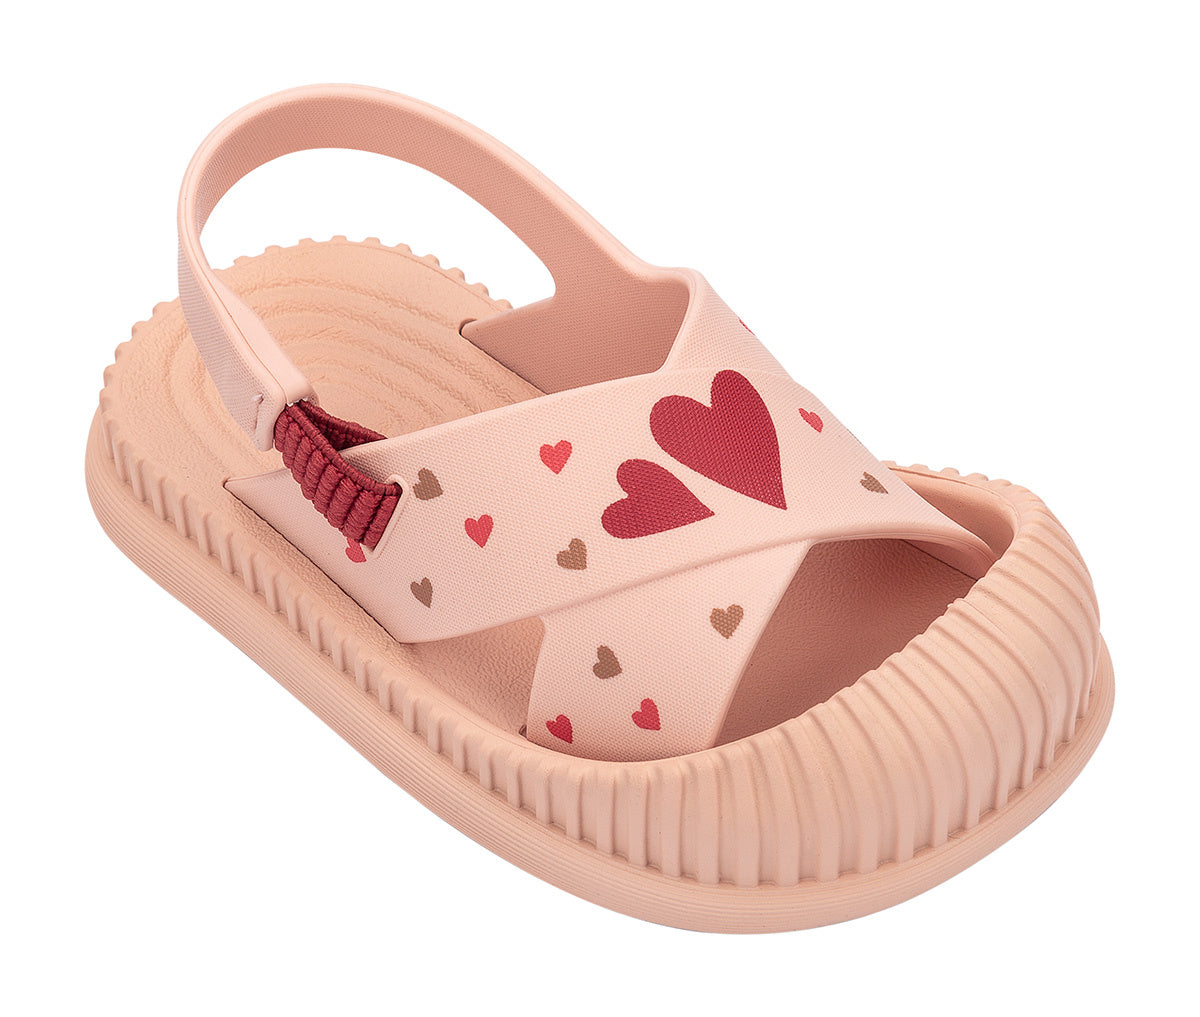 Angled view of a beige Ipanema Cute baby sandal with hearts on the strap.